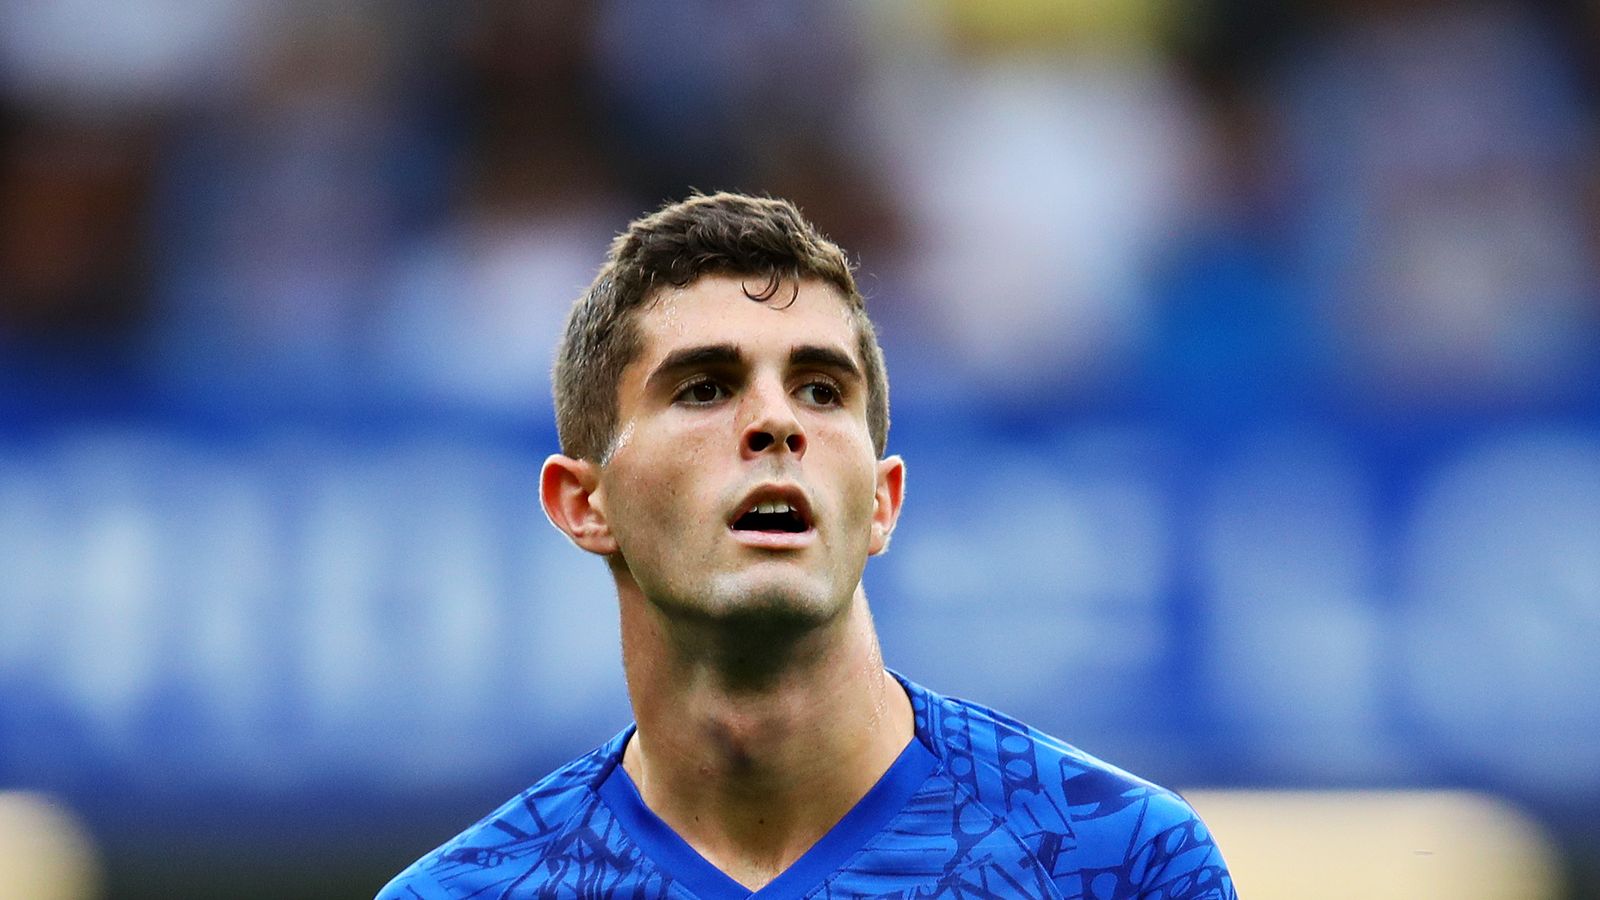 Chelsea's Christian Pulisic admits frustration at lack of game time